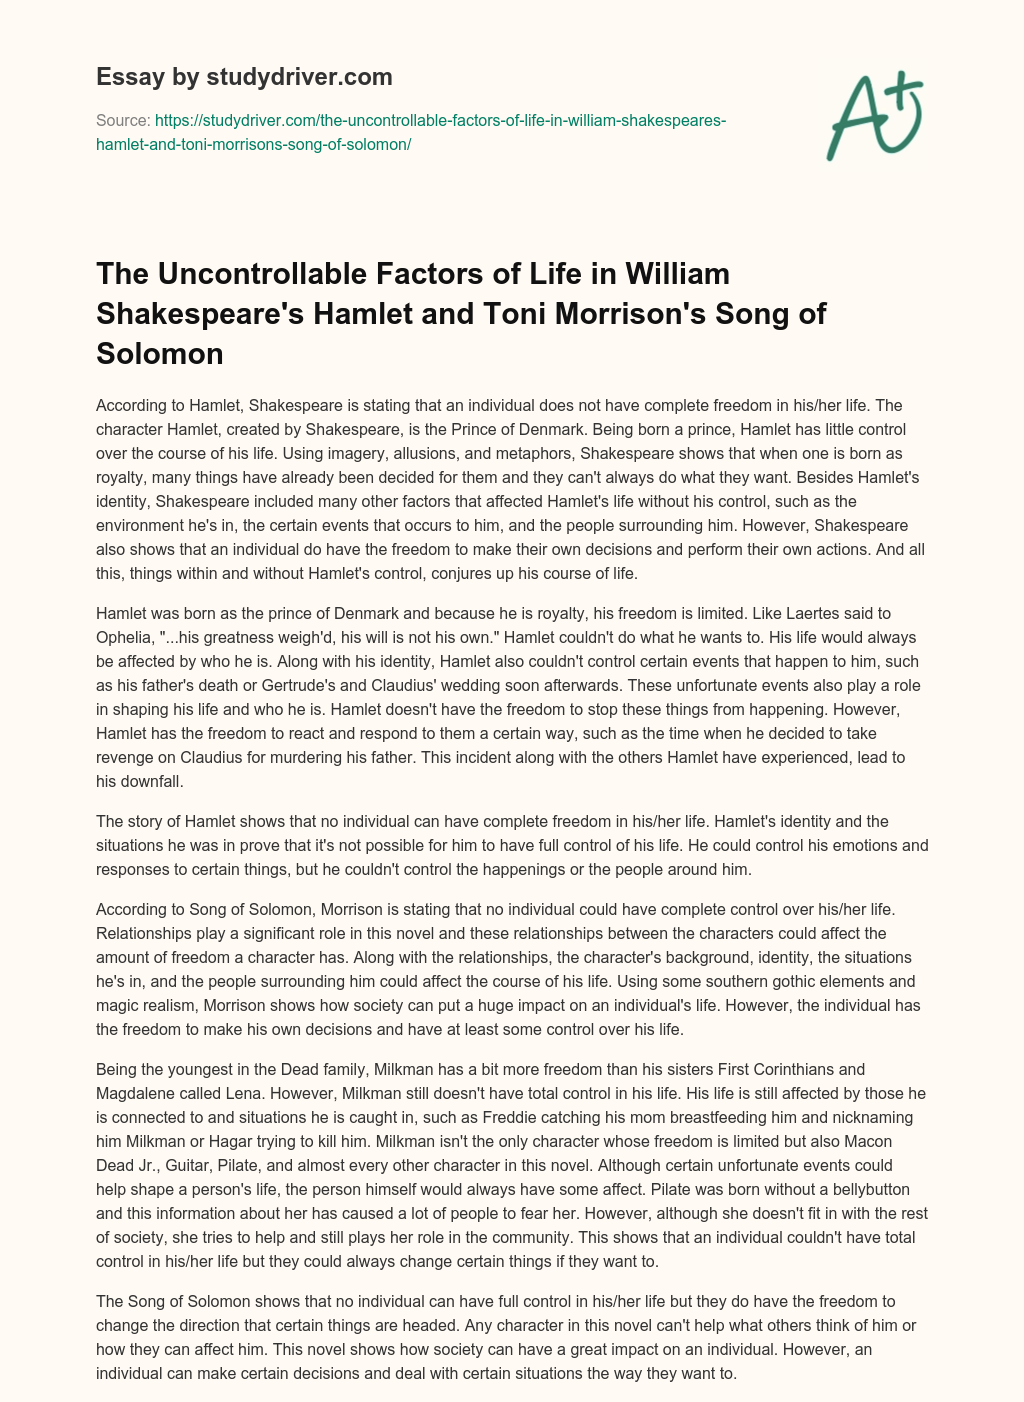 The Uncontrollable Factors of Life in William Shakespeare’s Hamlet and Toni Morrison’s Song of Solomon essay